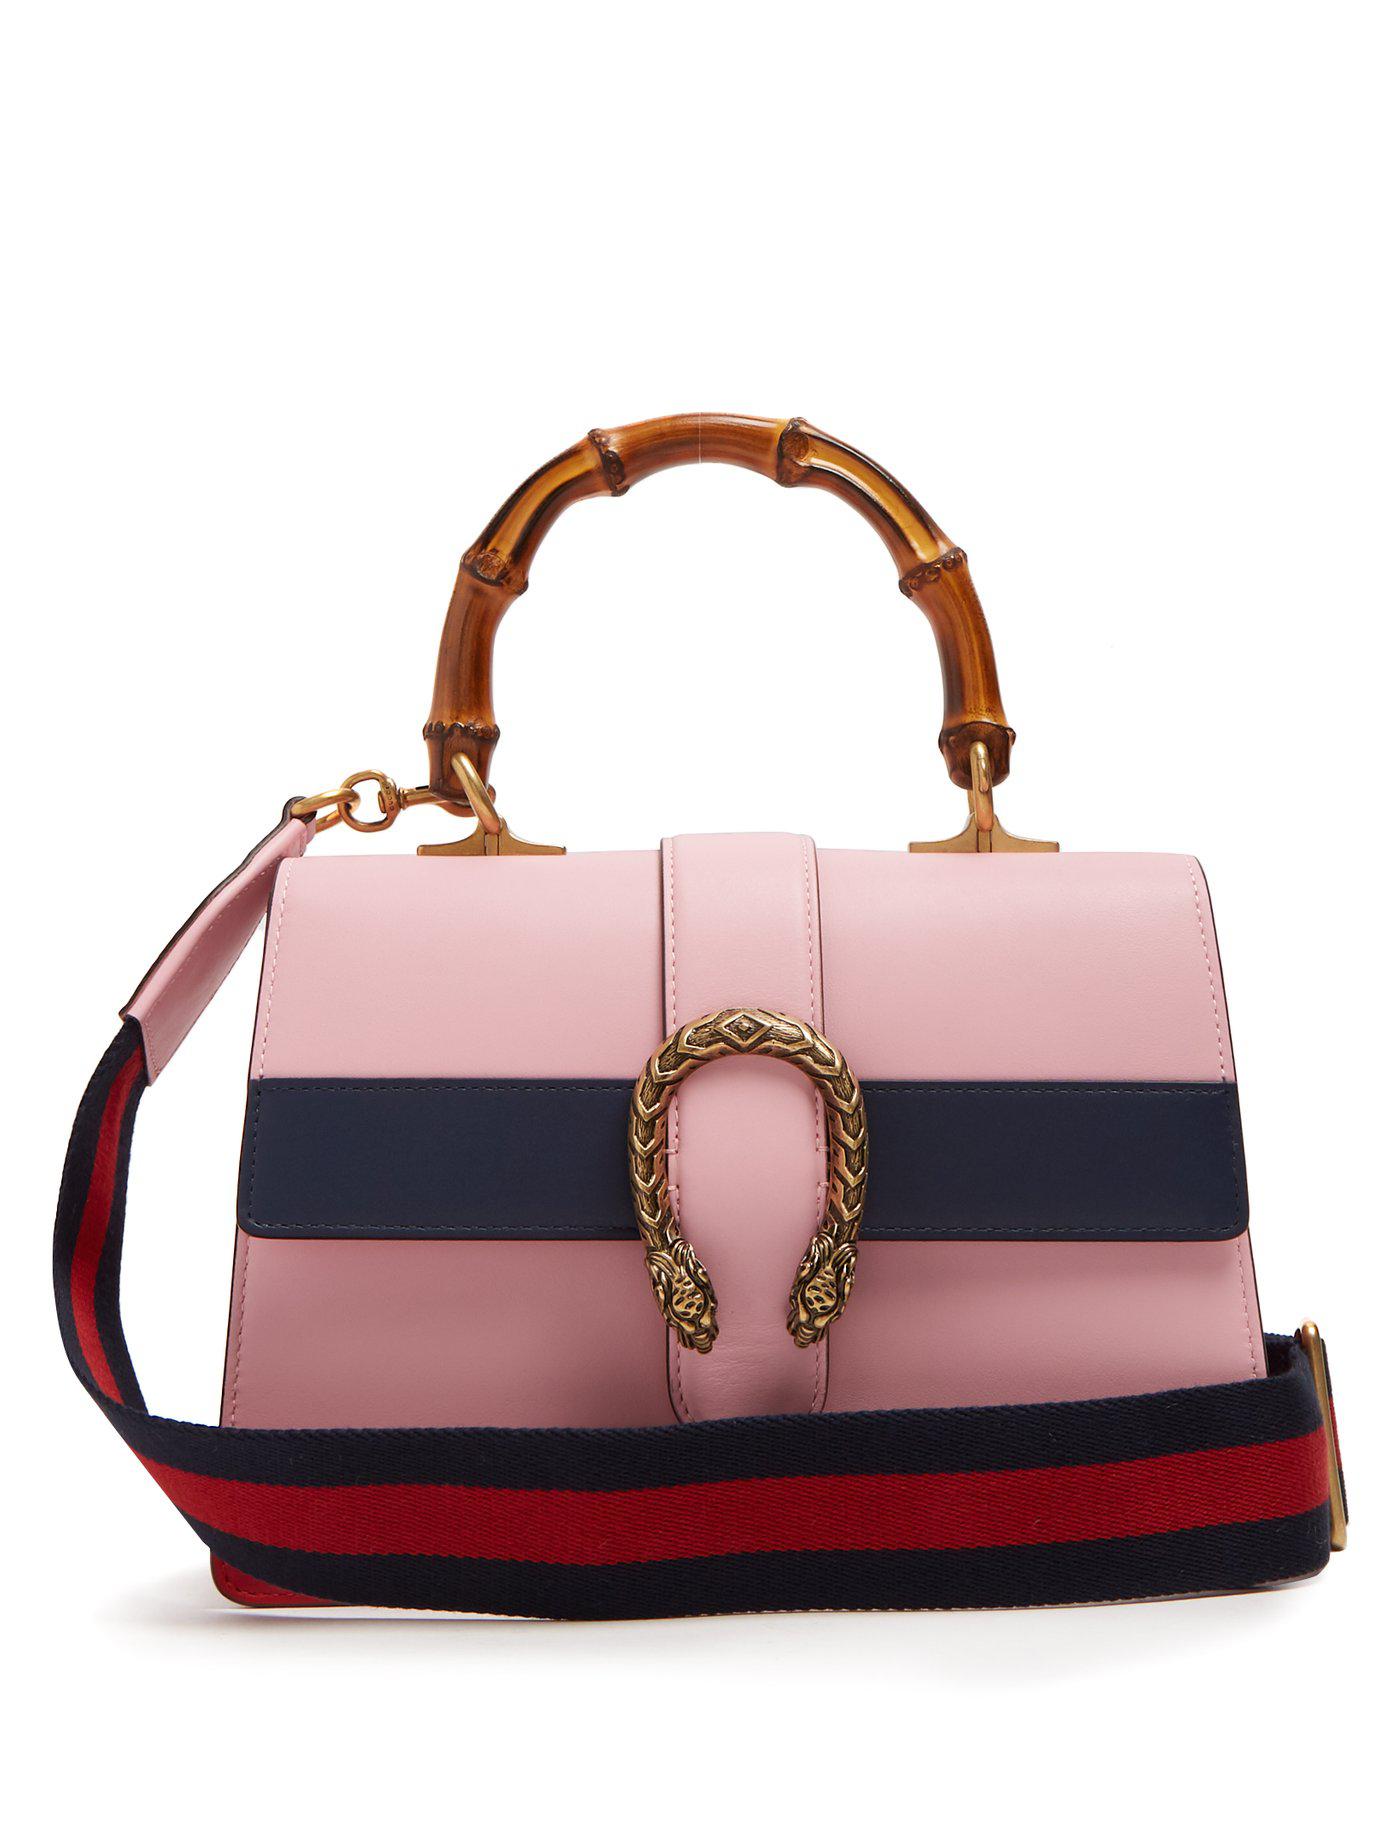 Gucci Dionysus Medium Bamboo Handle Leather Bag in Pink | Lyst Canada